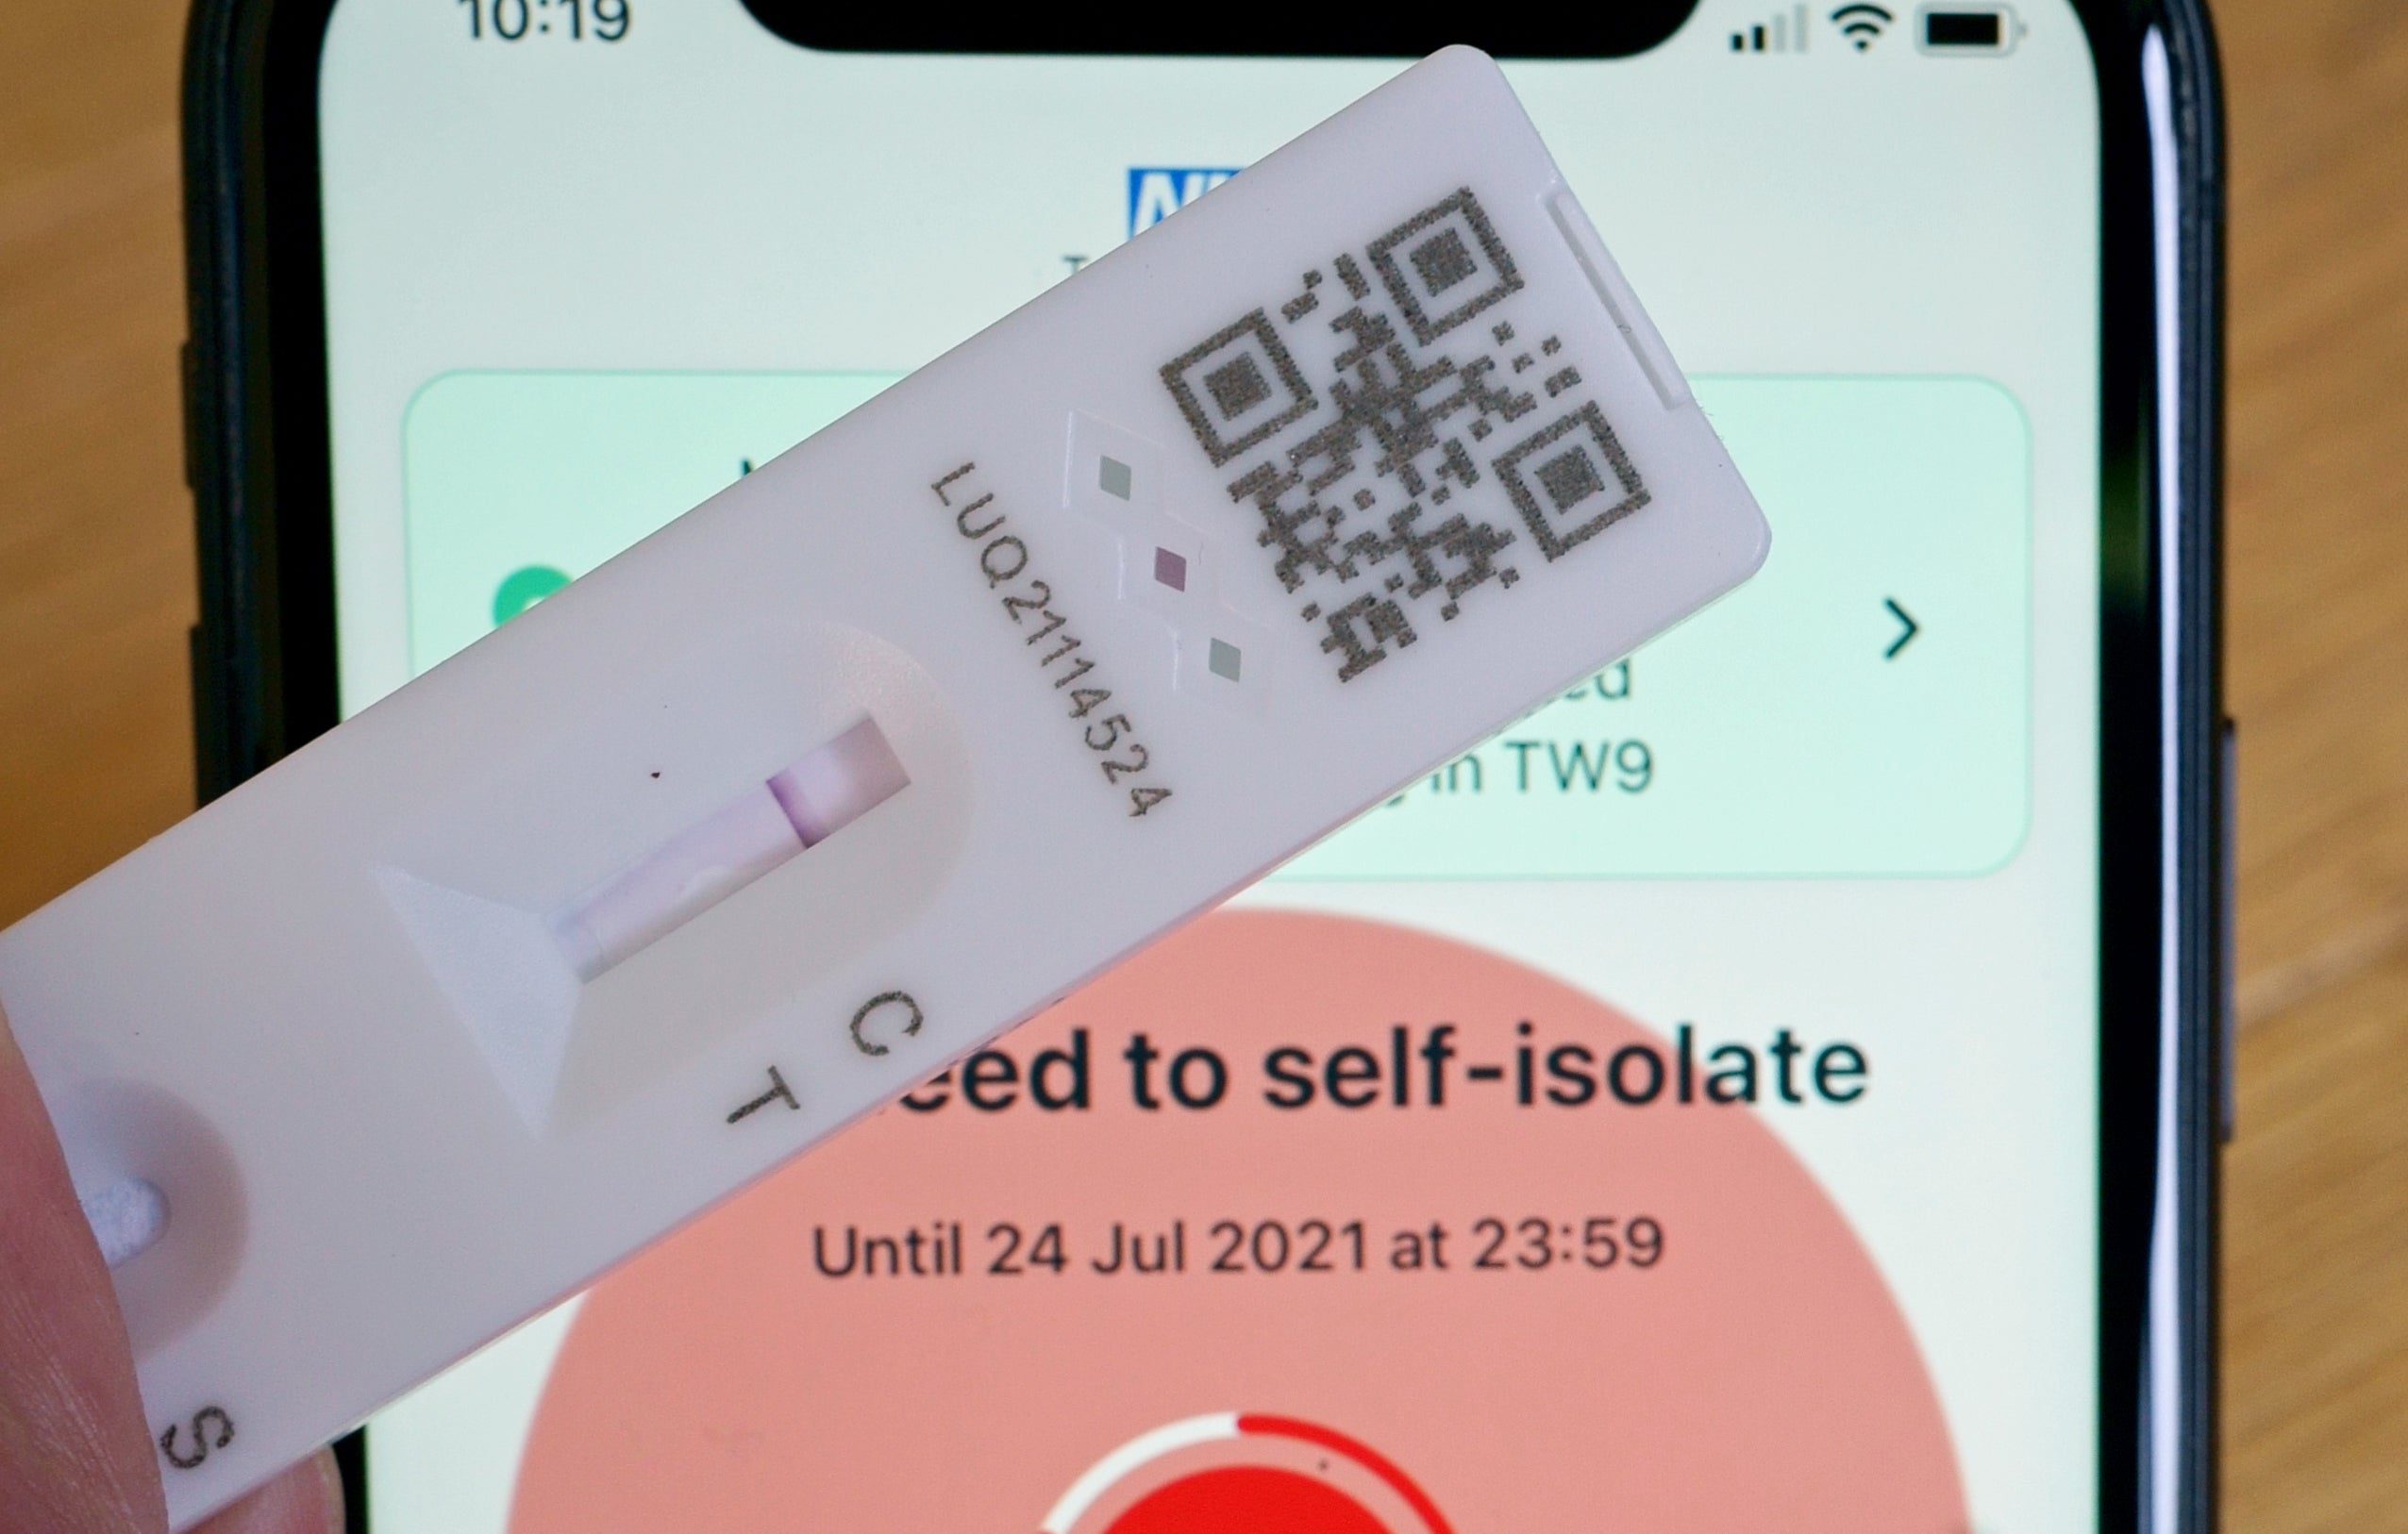 A negative lateral flow test next to advice from the NHS Covid app to self-isolate